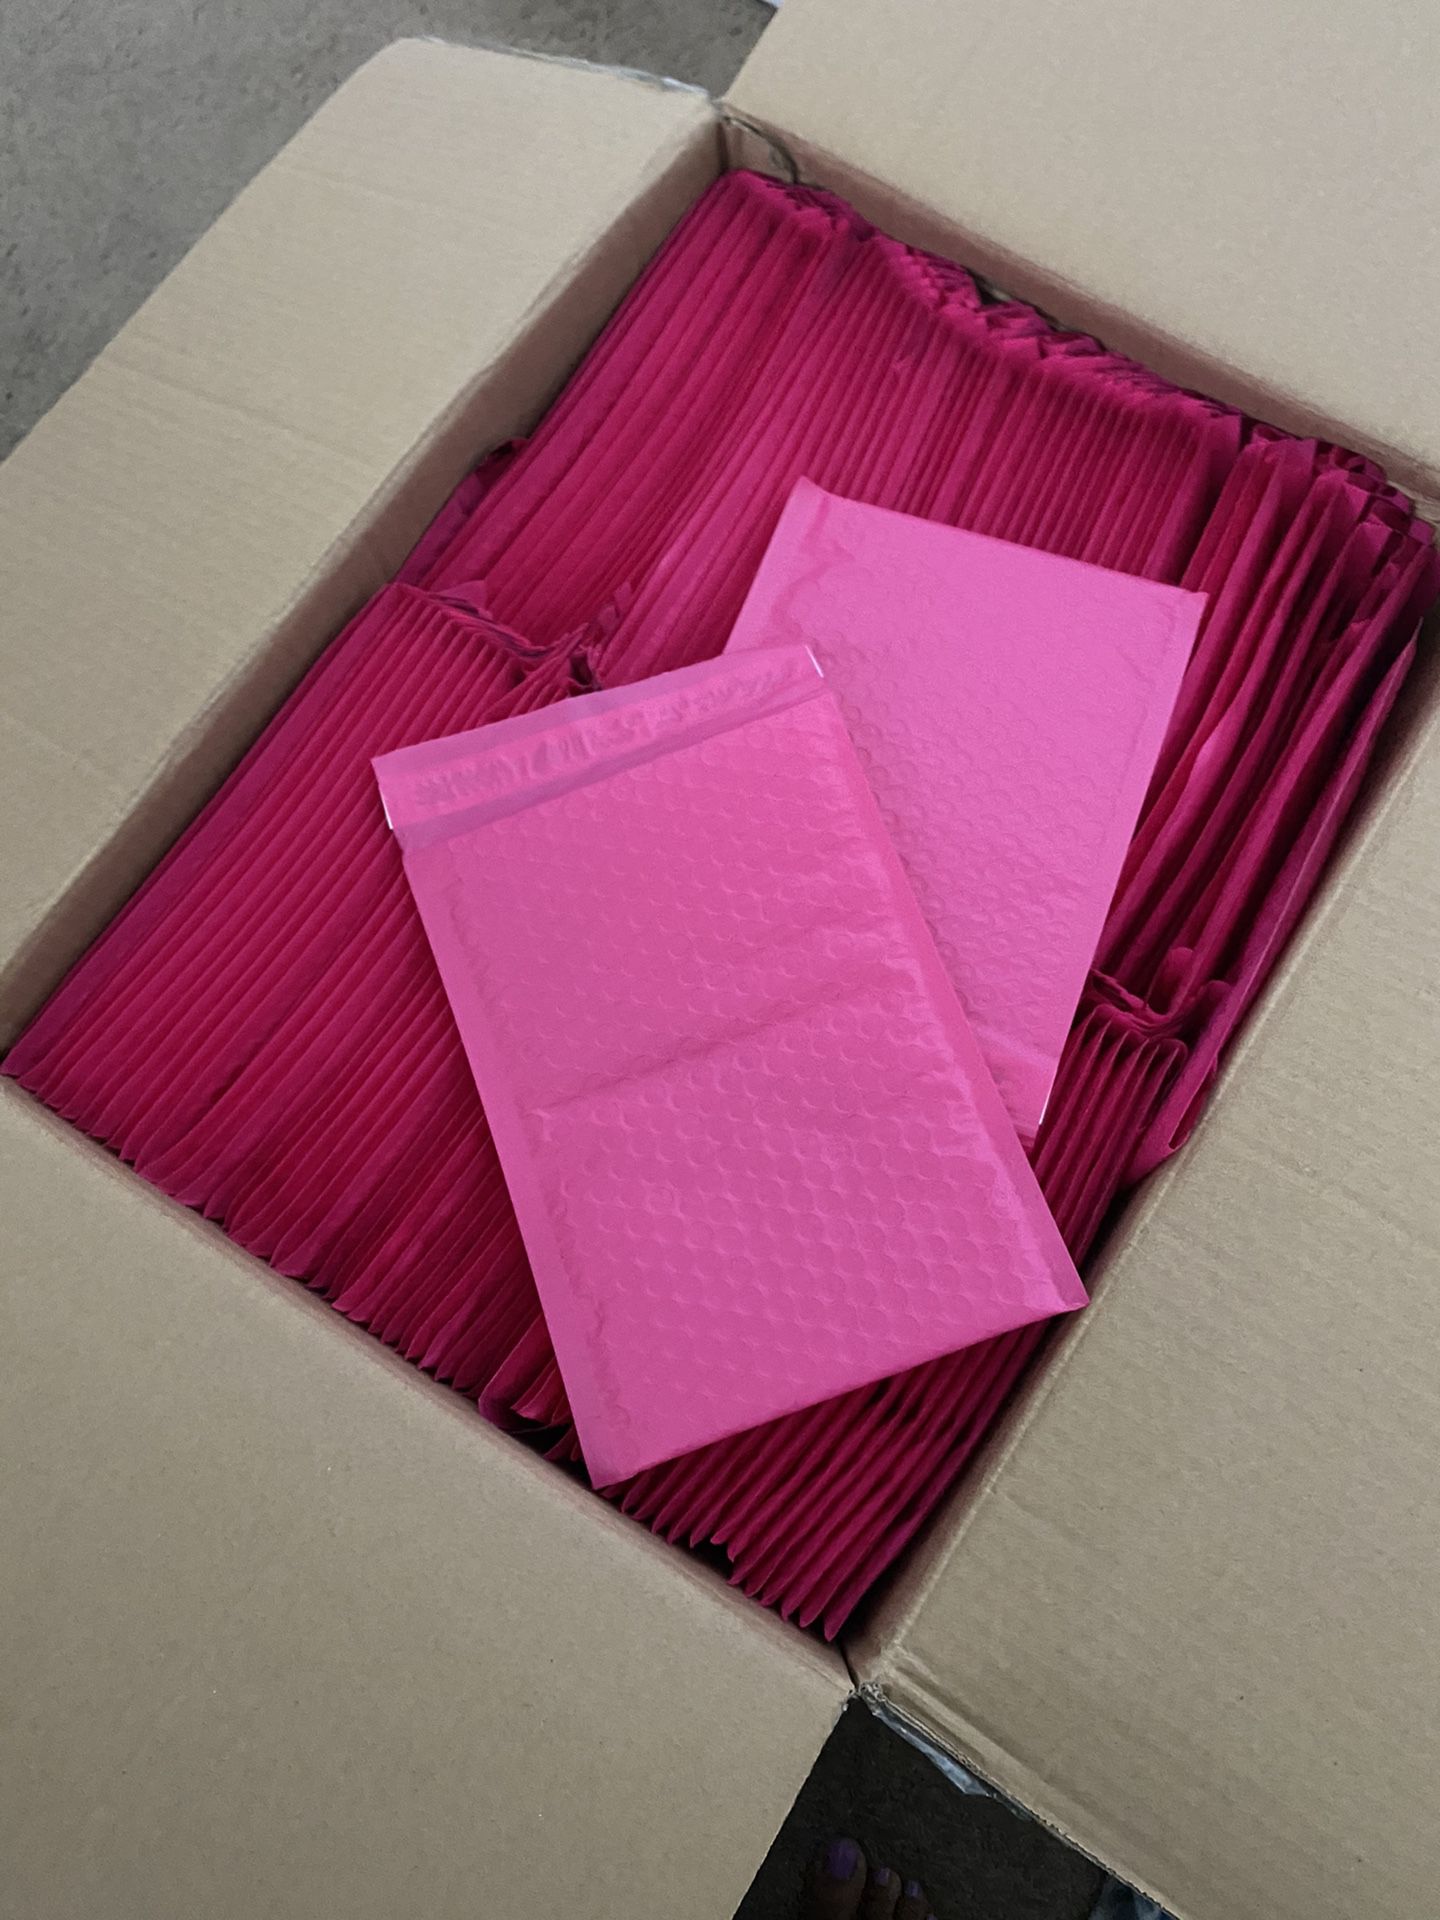 100 pack of bubble mailers Hot Pink 6x10